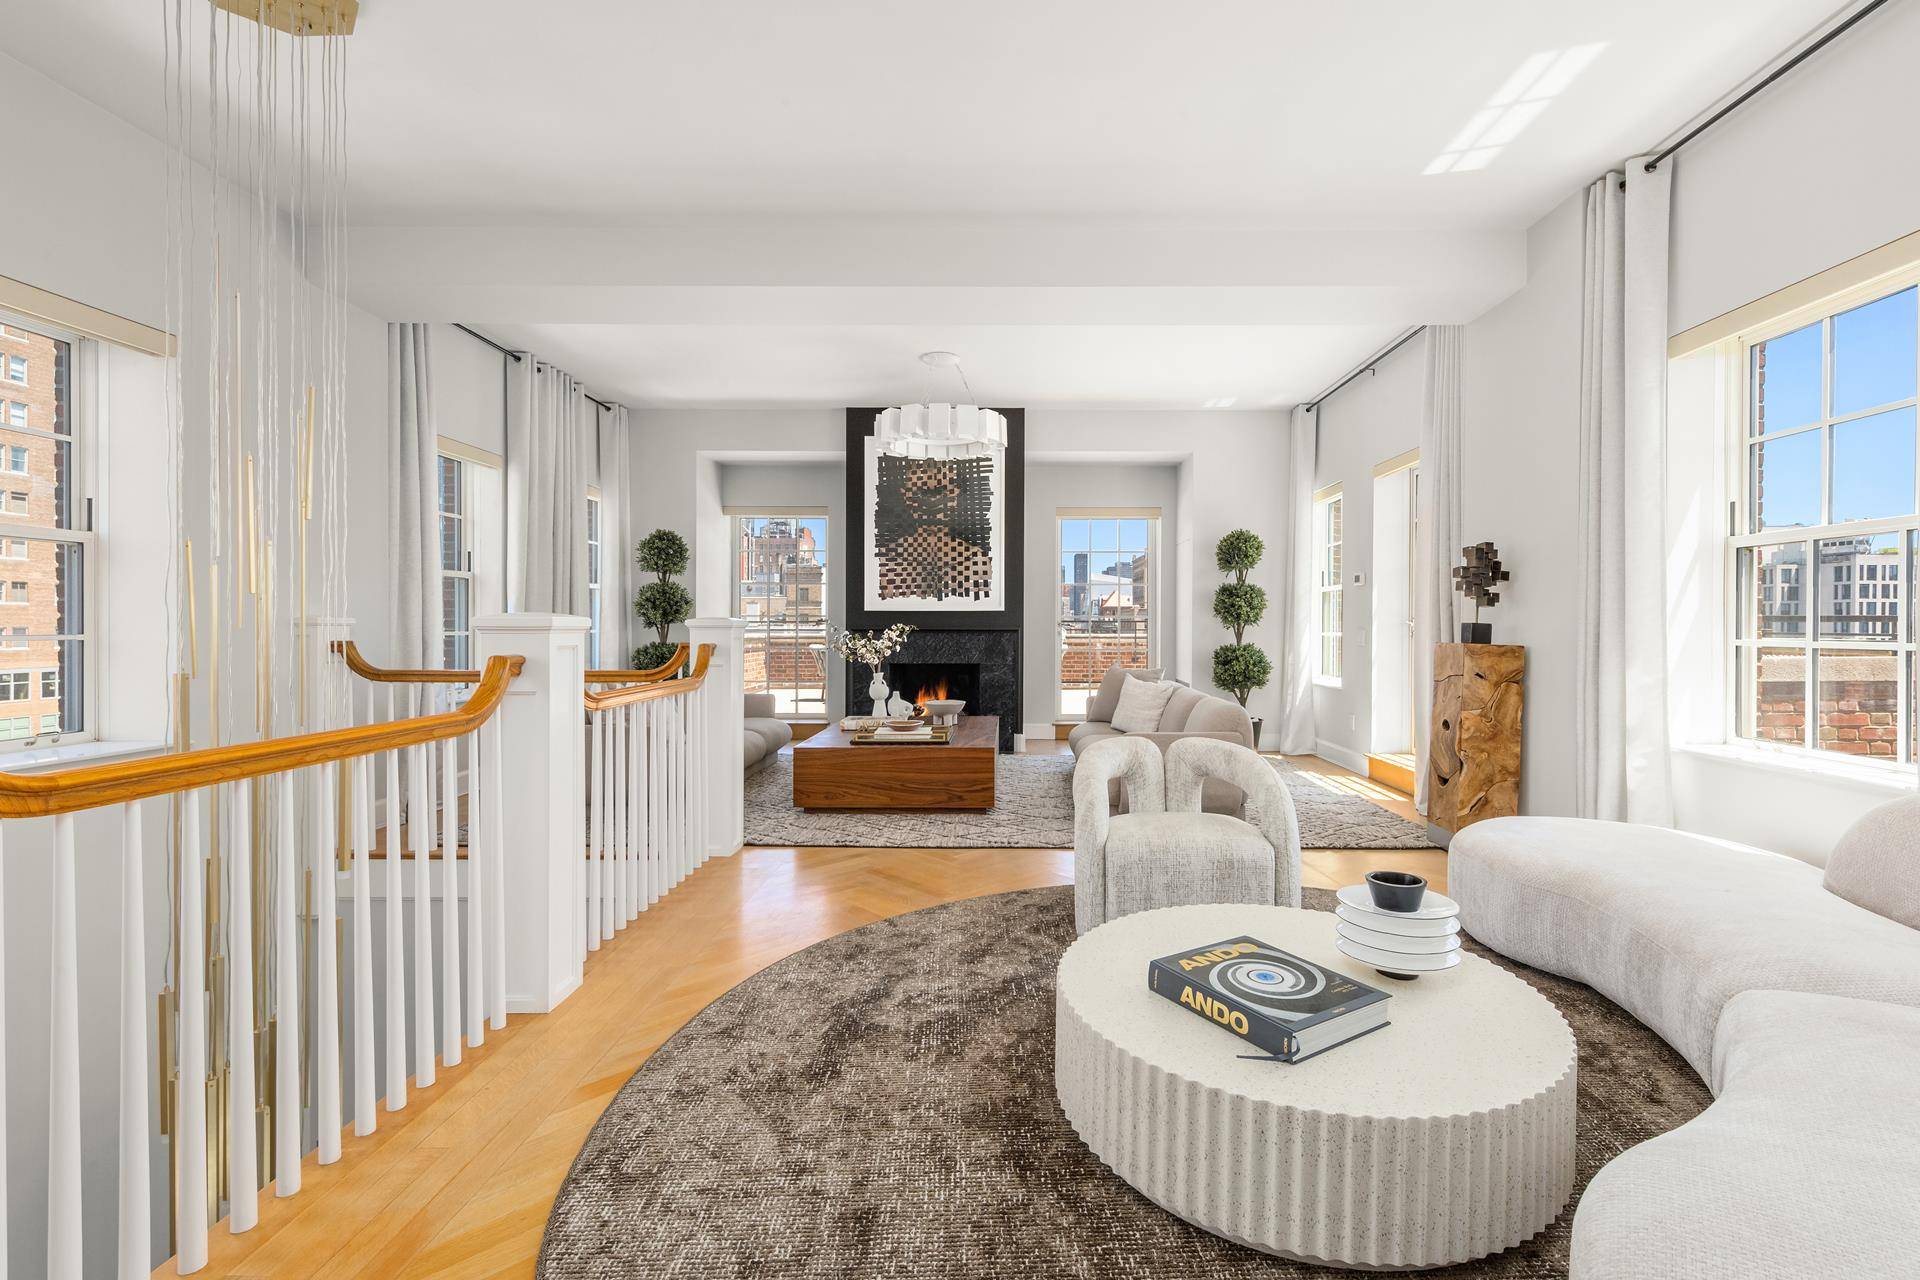 Experience the epitome of Manhattan living in this stunning Gramercy Park penthouse condominium.